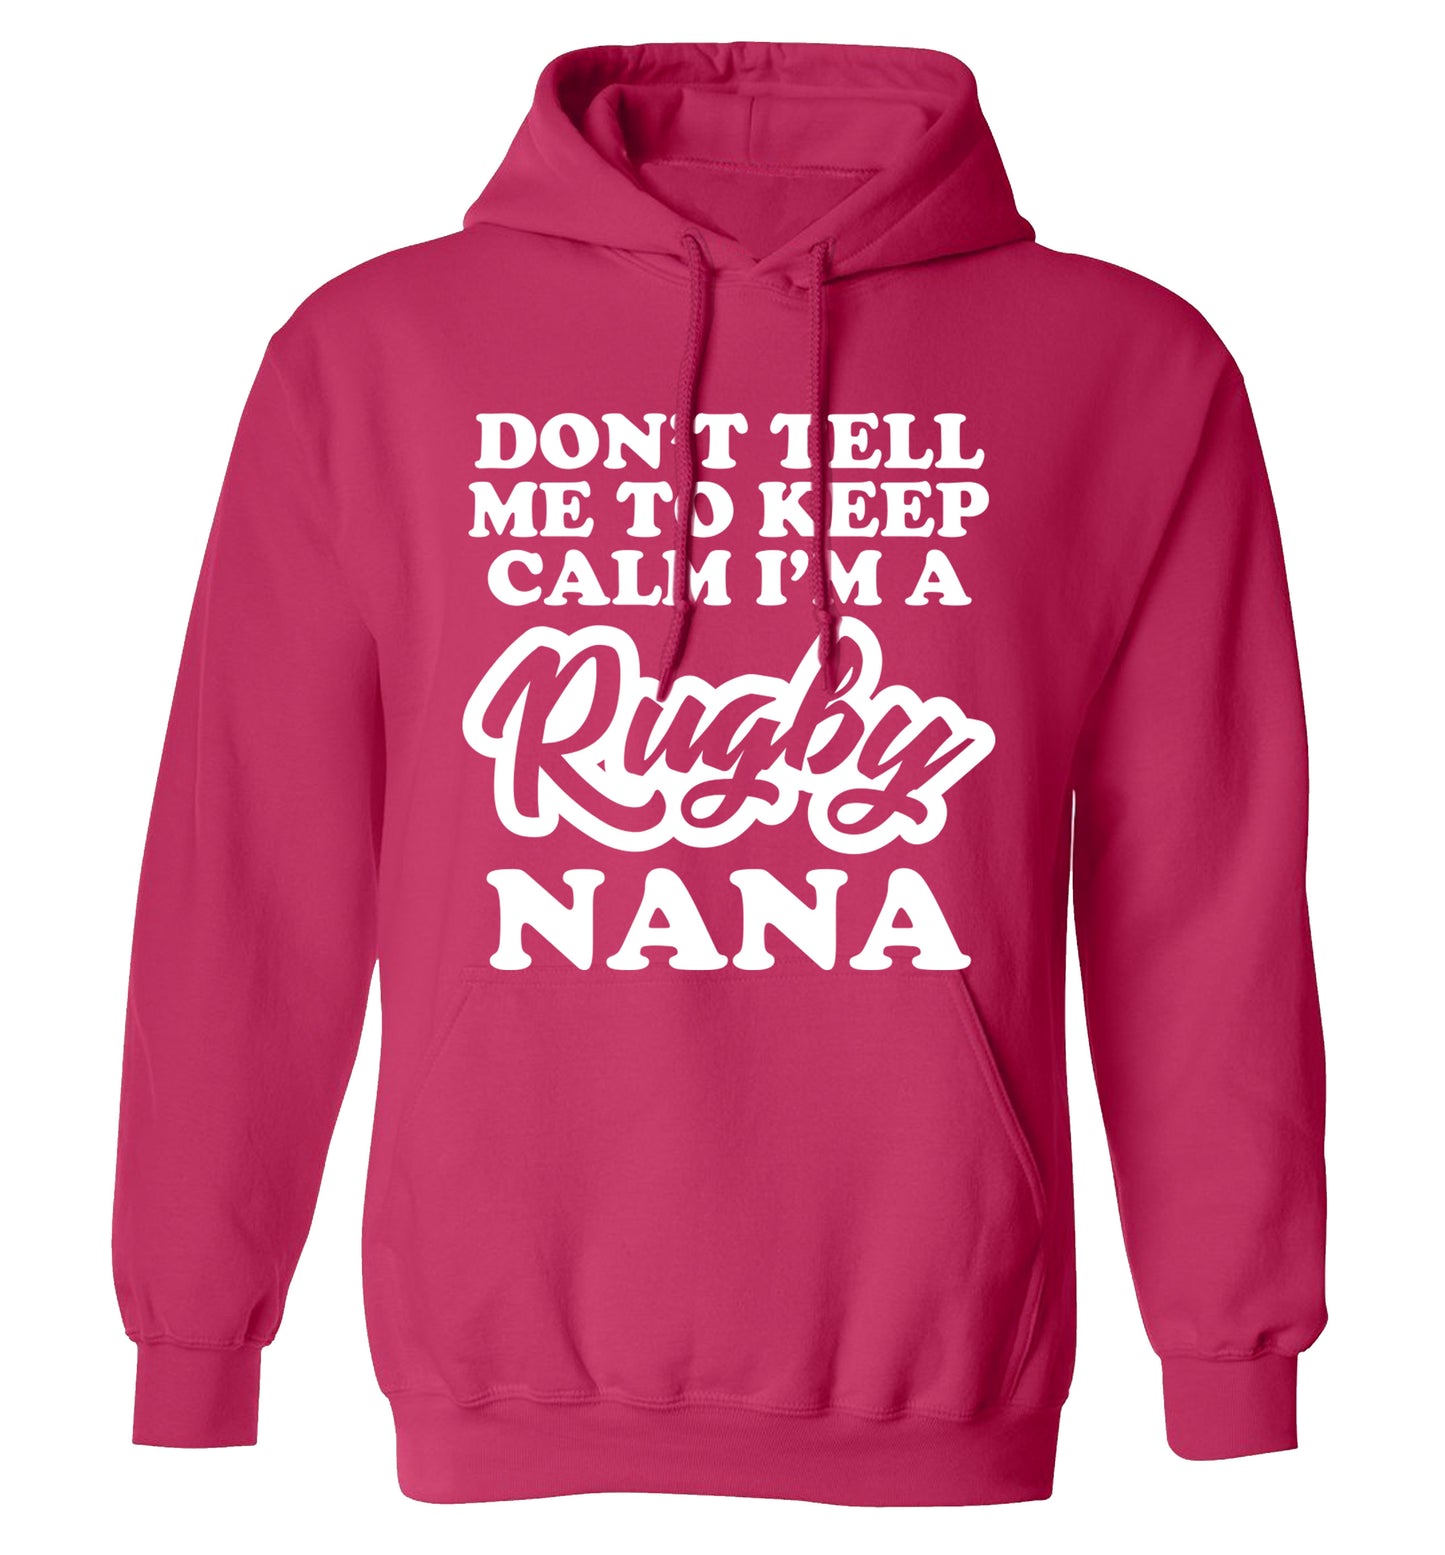 Don't tell me to keep calm I'm a rugby nana adults unisex pink hoodie 2XL